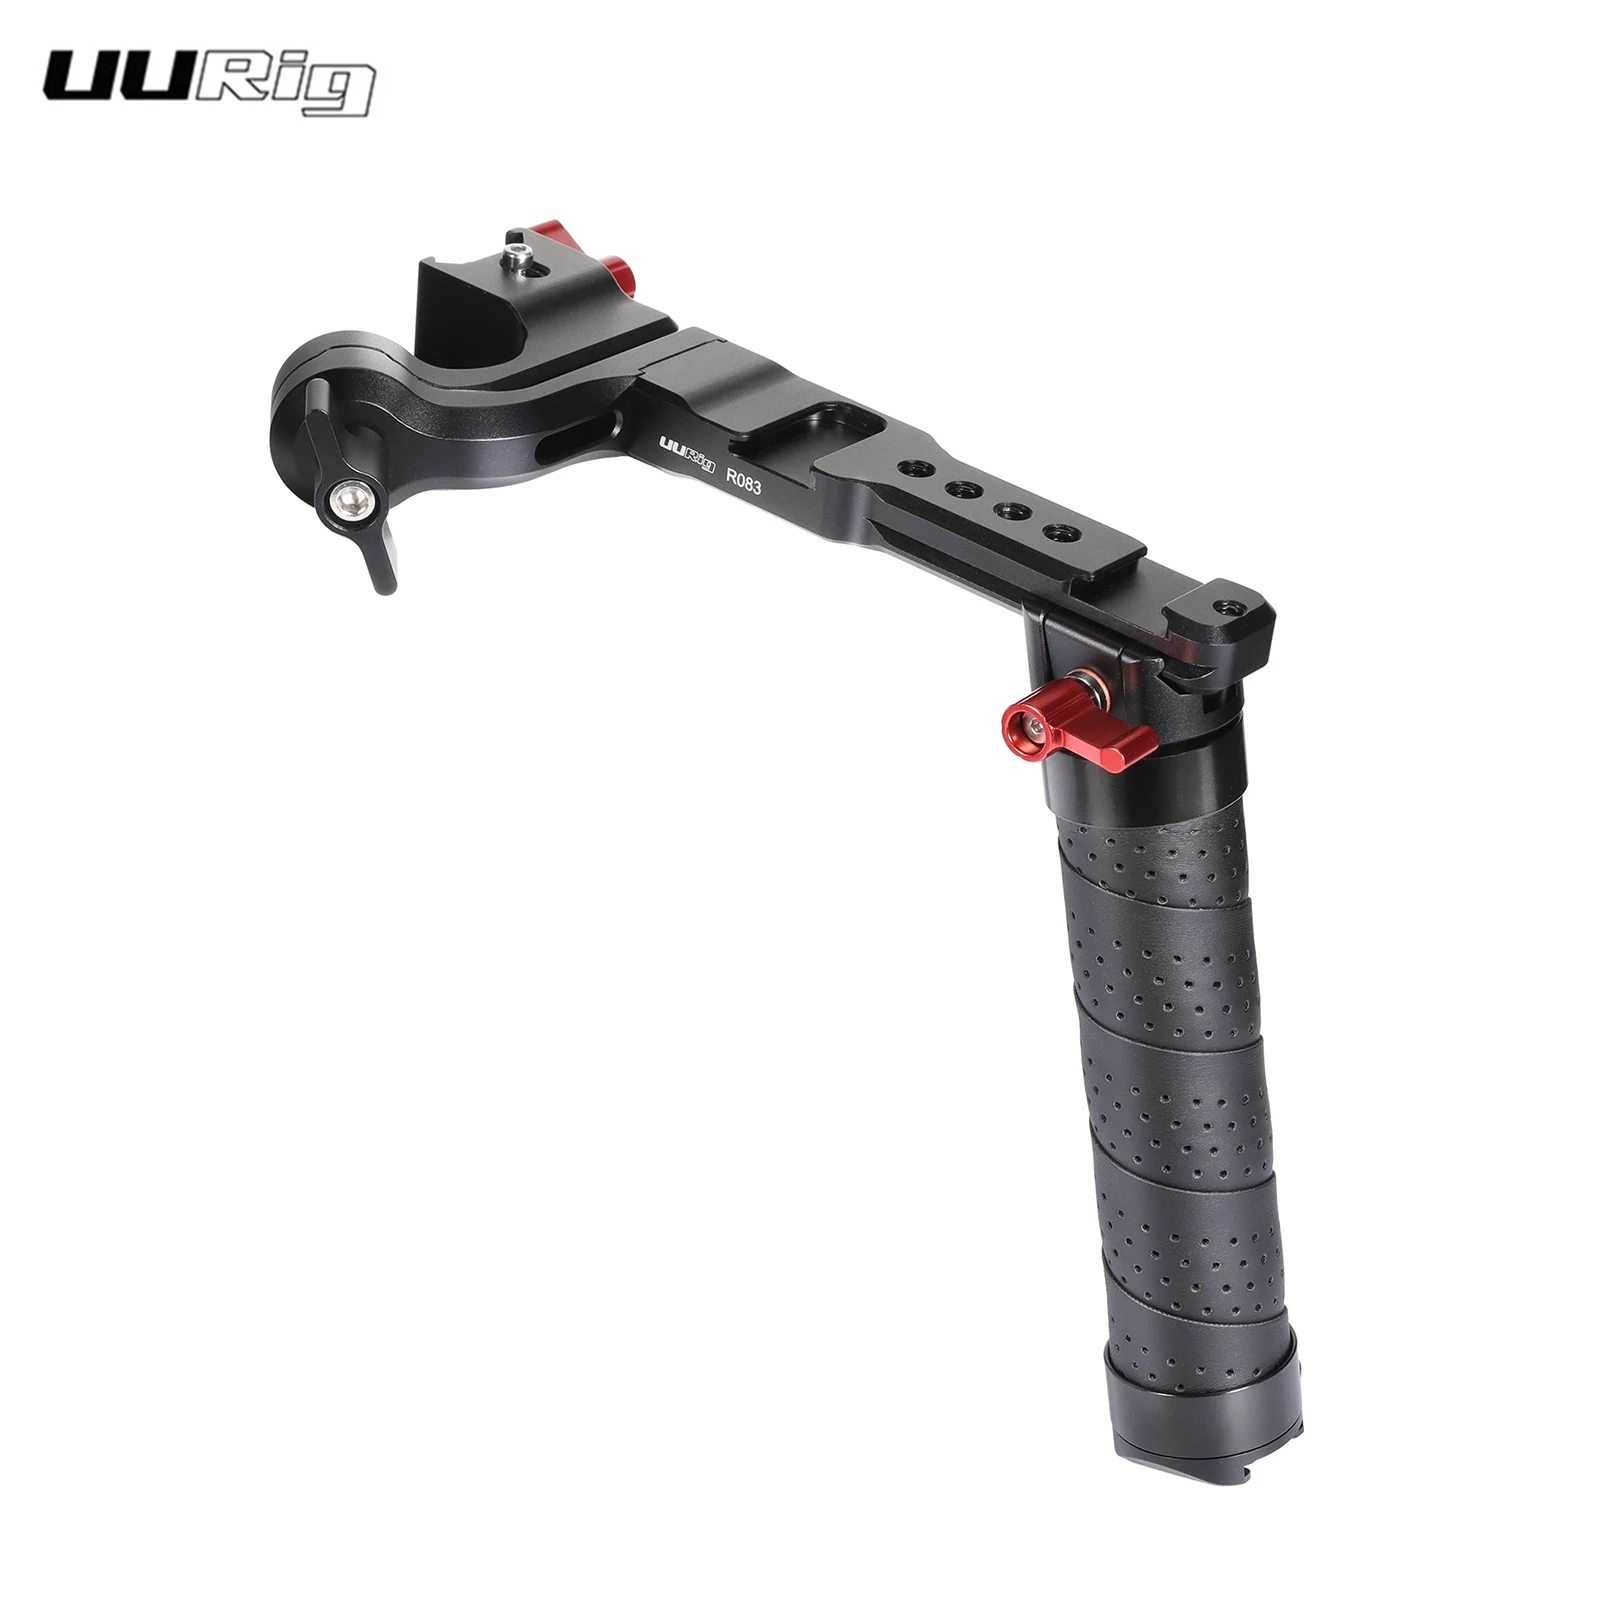 

UURig R083 Multi-Form Gimbal Stabilizer Handle Hand Grip Extension Bracket Cold Shoe Mounts 1/4 Inch Threads for DJI Ronin RSC2